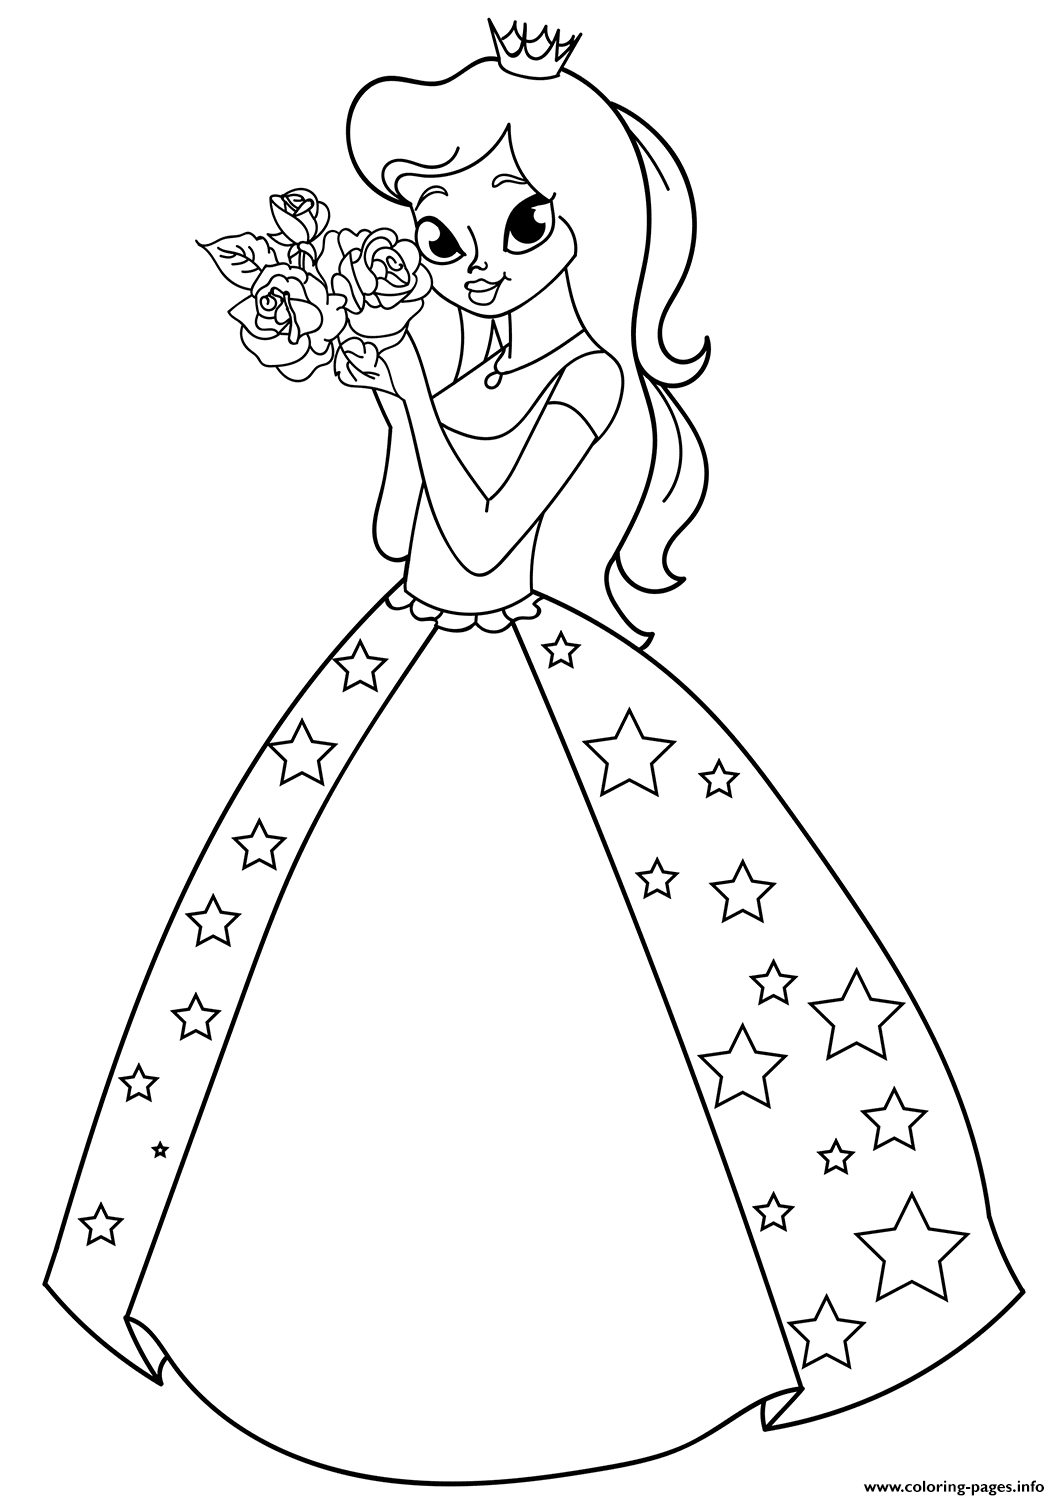 Princess With Roses coloring